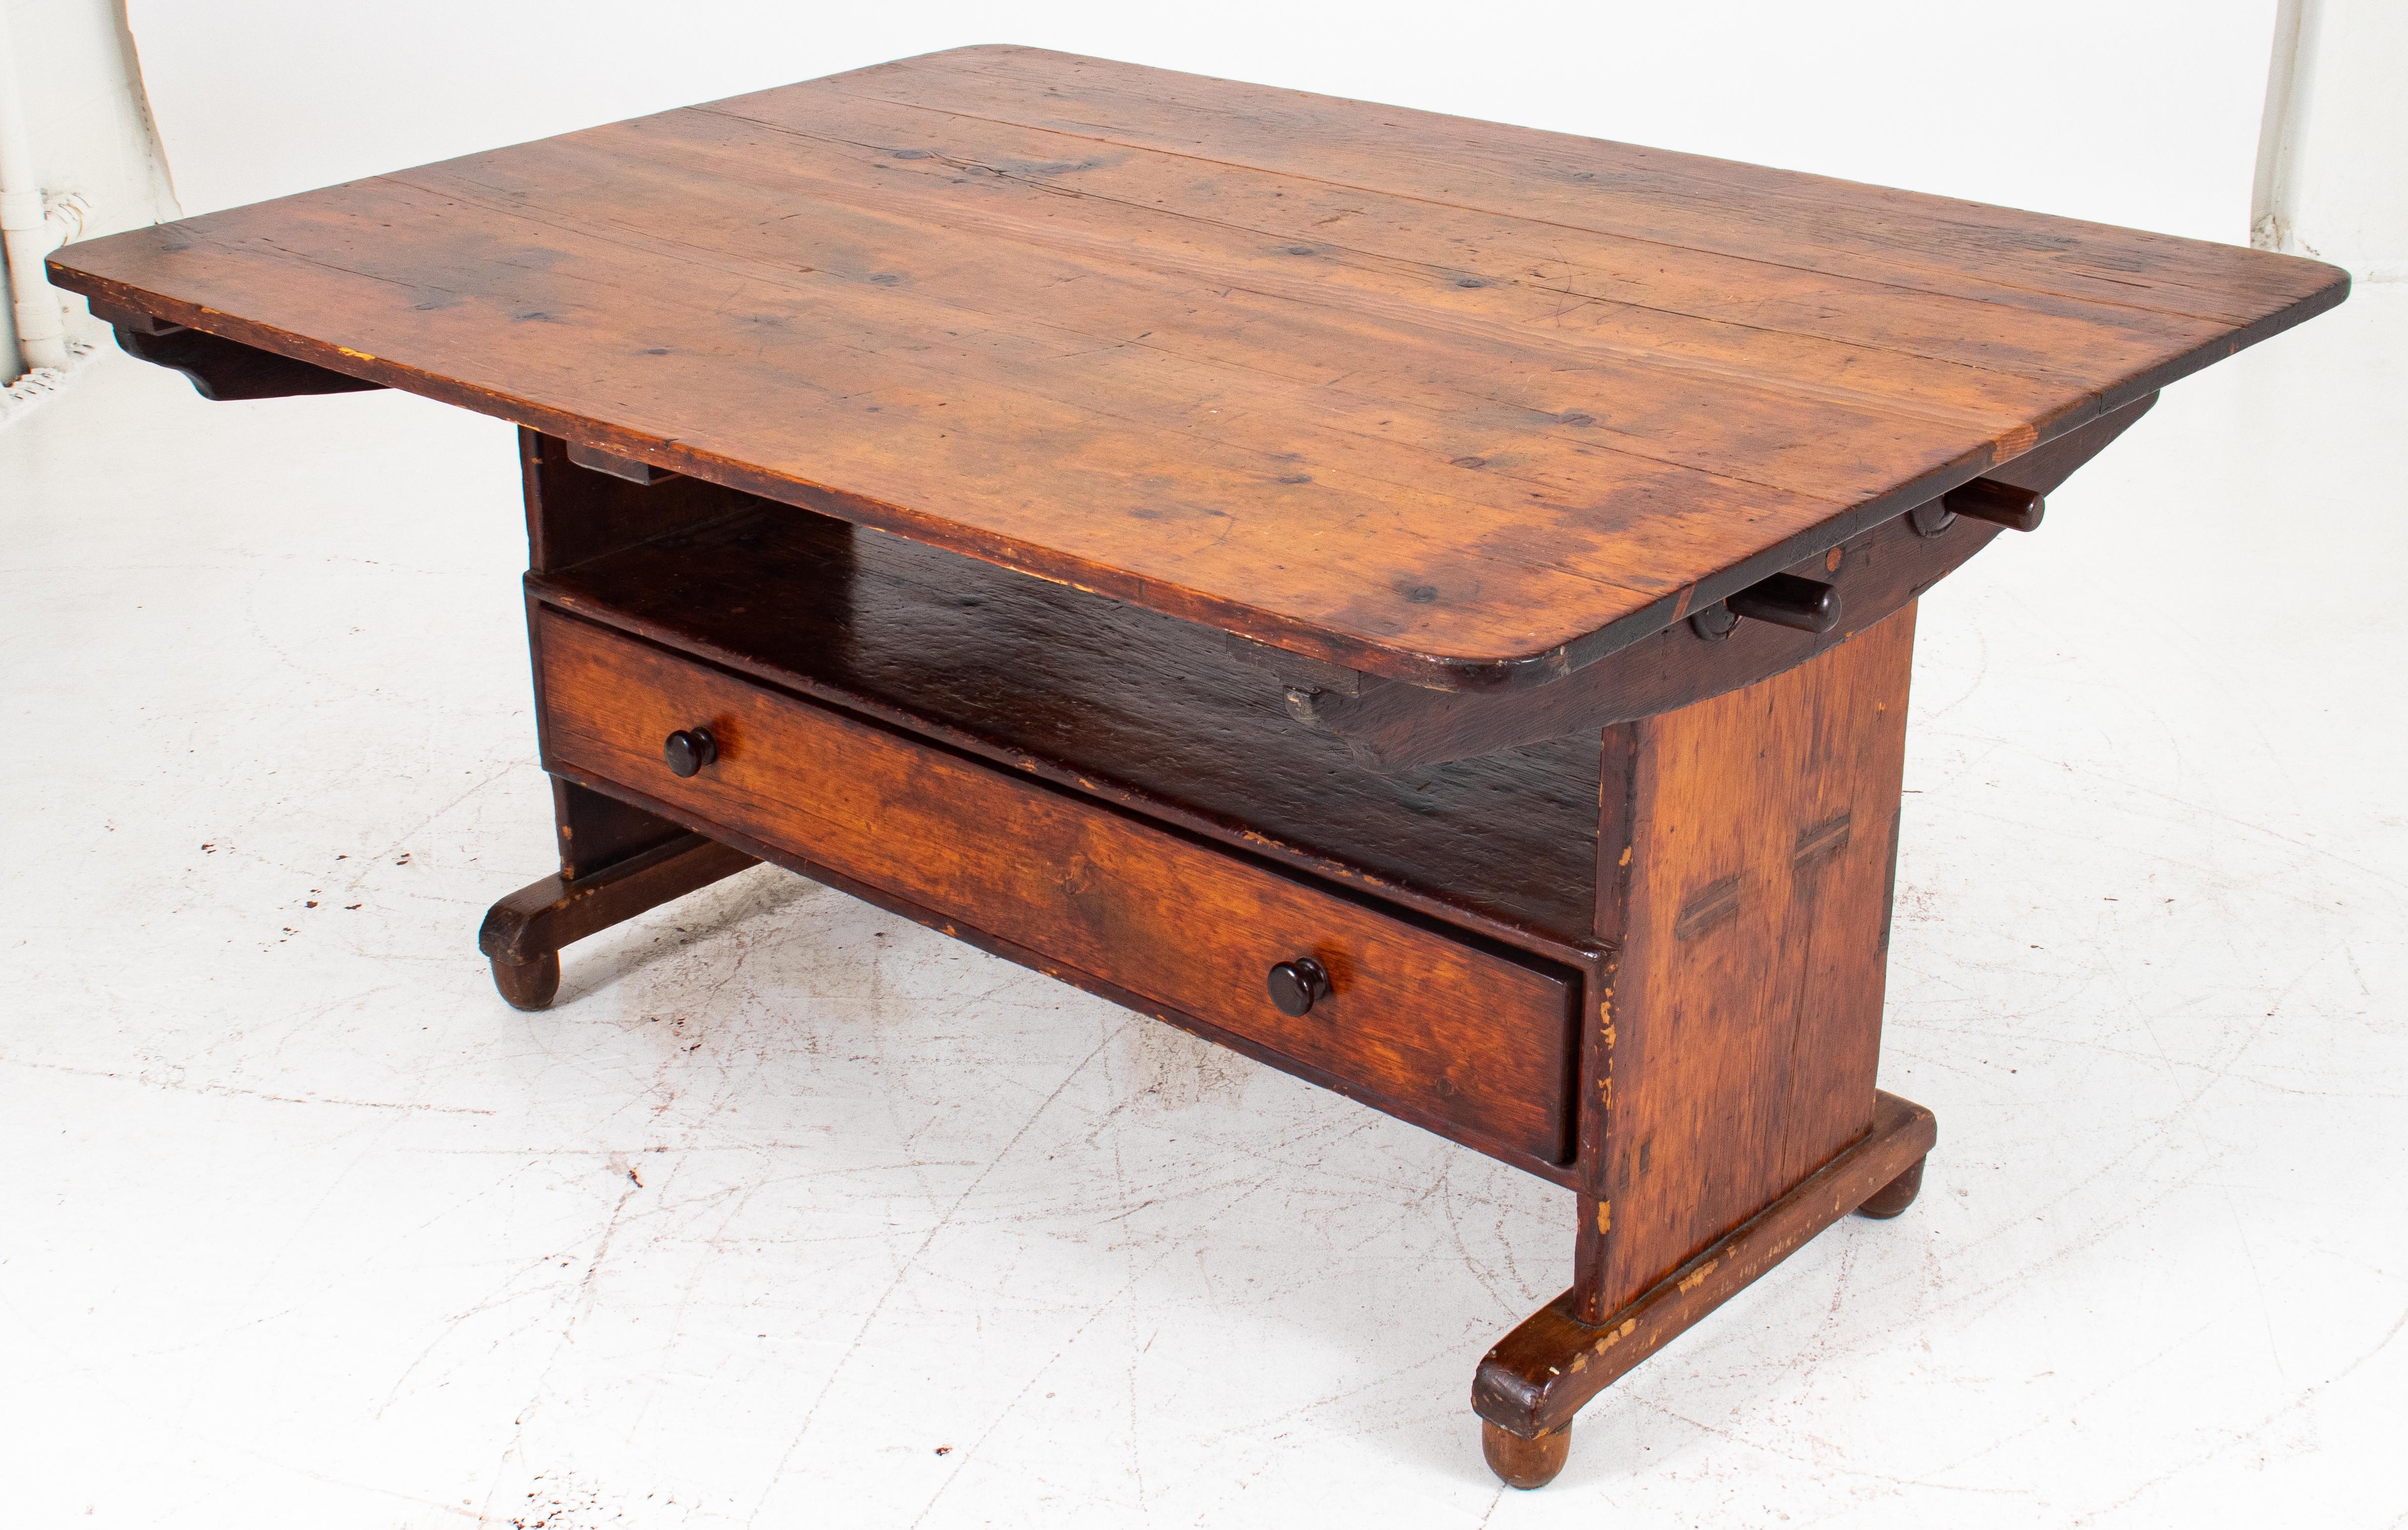 Provincial French pine tavern table-bench, 19th c., possibly Alsatian and with Helvetic influence, with removable and/or hinged top held in place by two dowels, lifting to reveal a bench above a long drawer for storage on half-rounded feet. 30